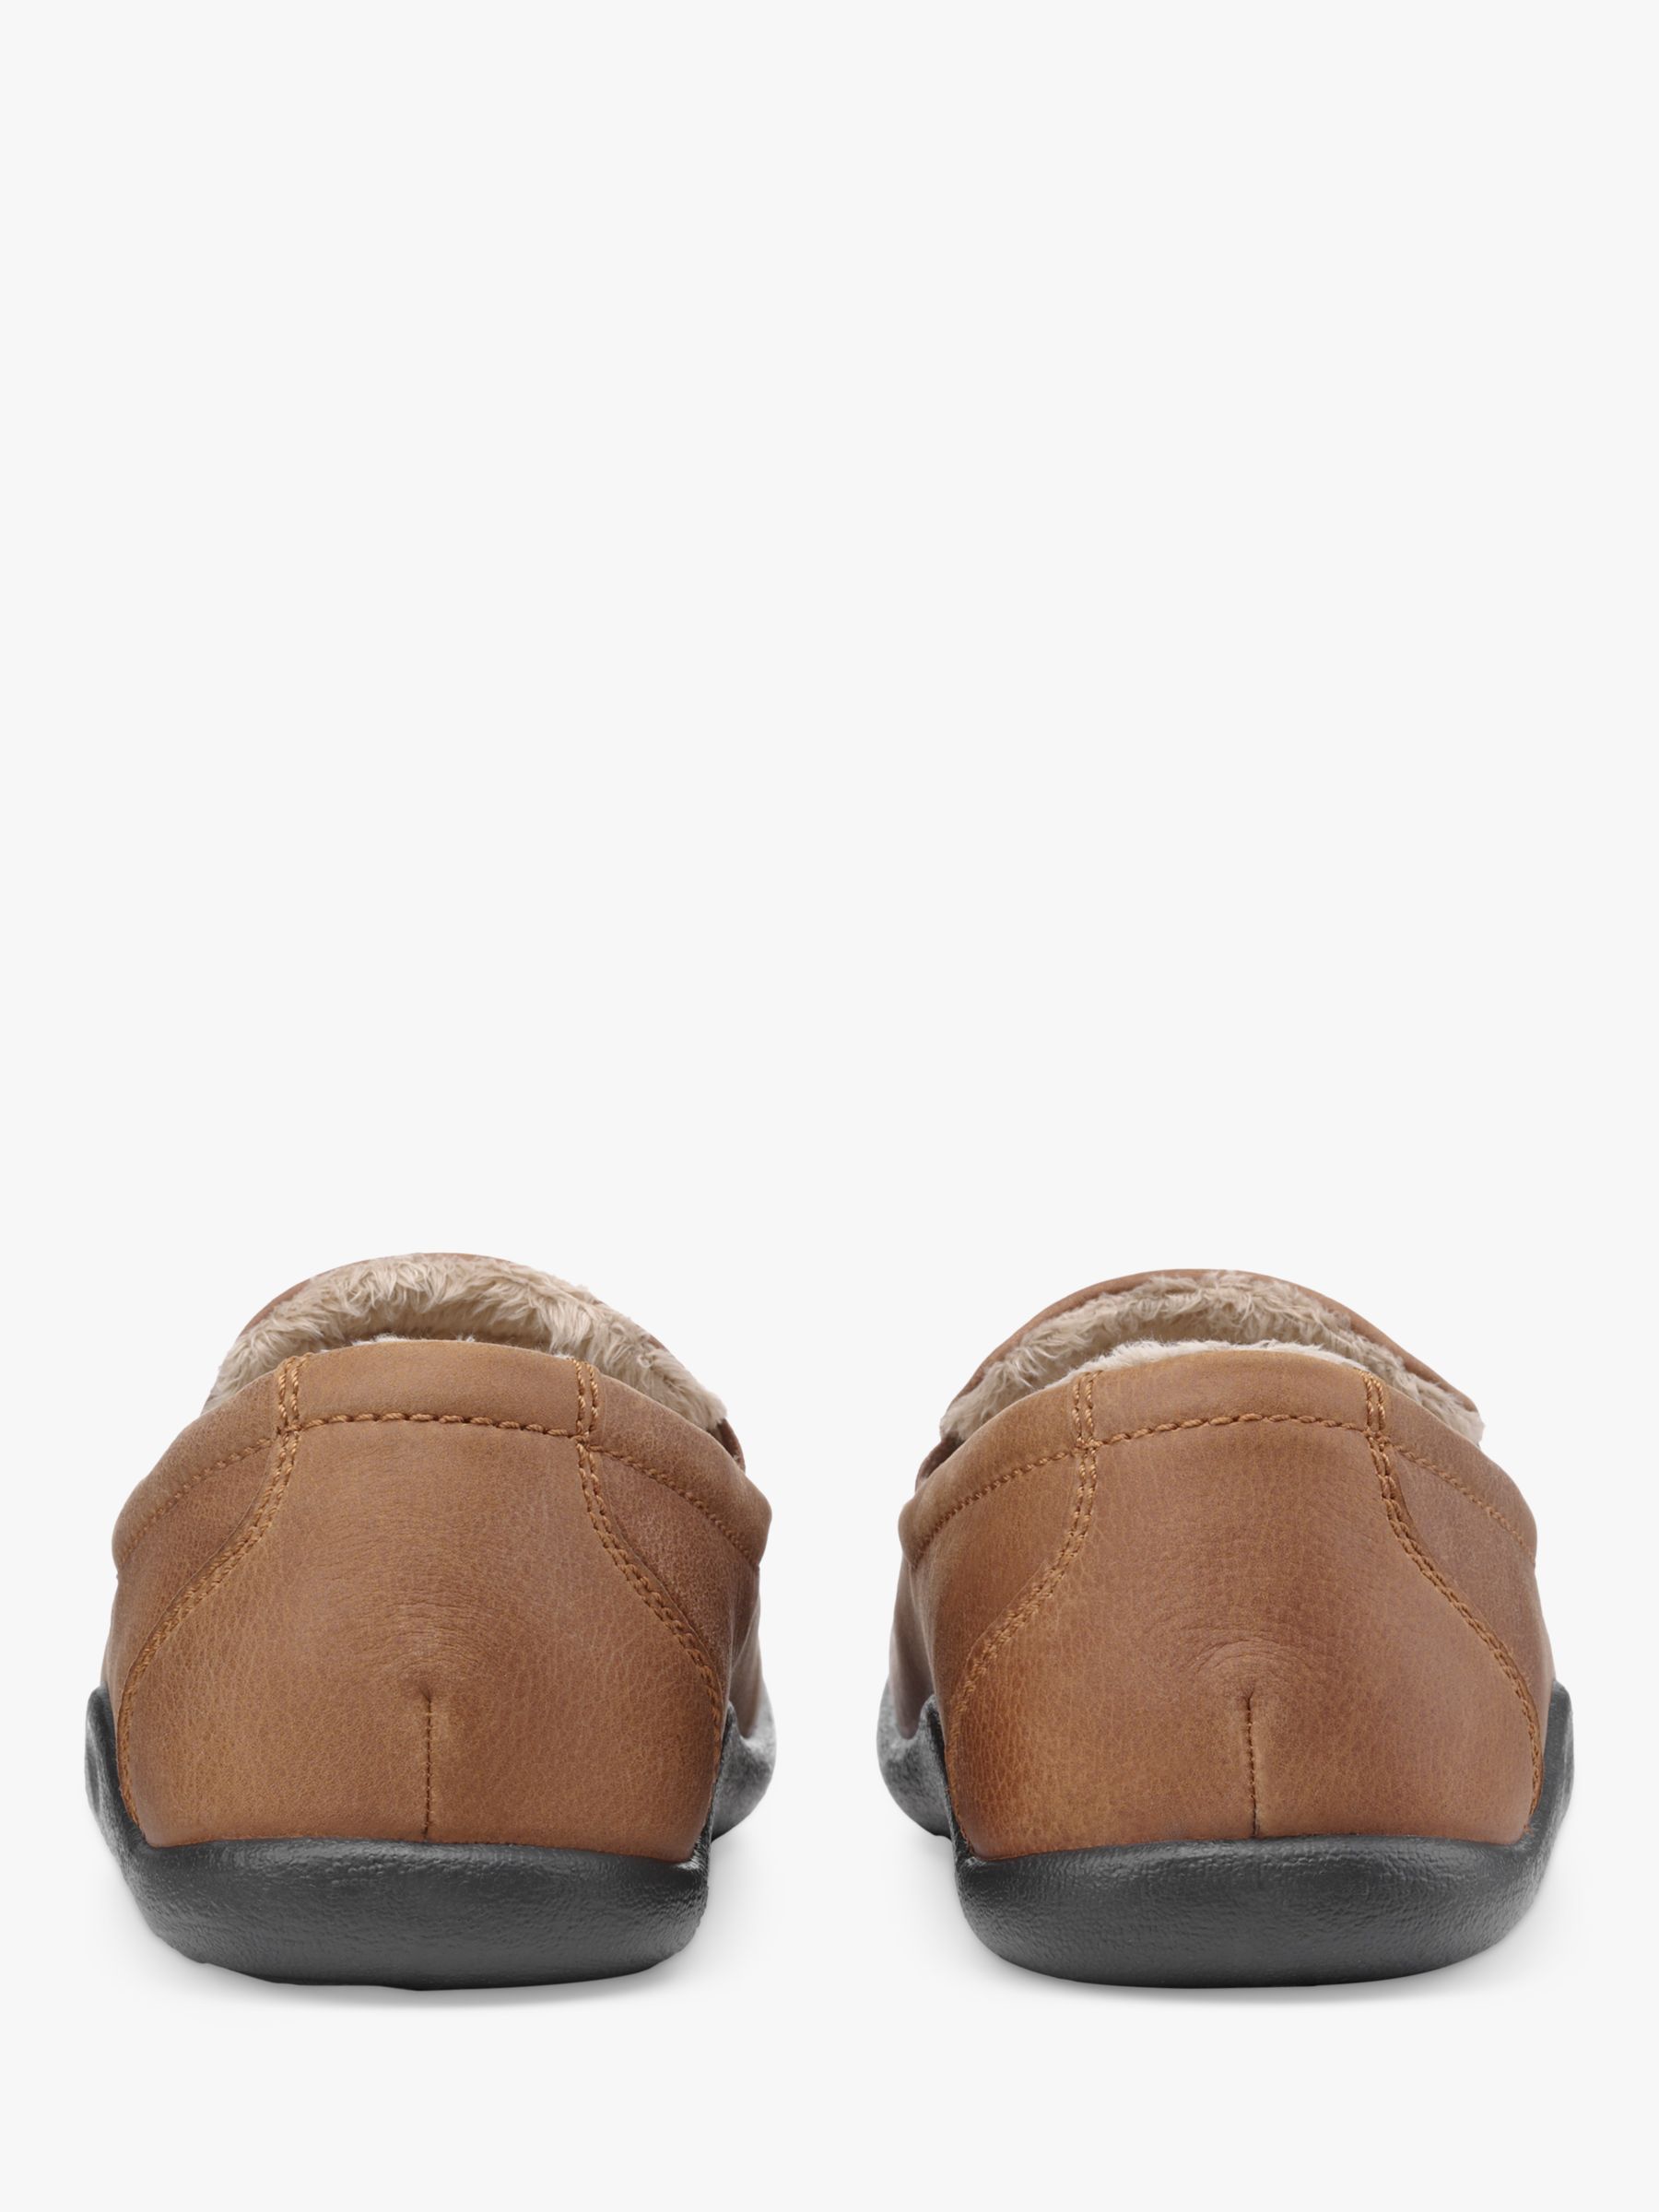 Hotter Relax Leather Slippers, Tan, 9